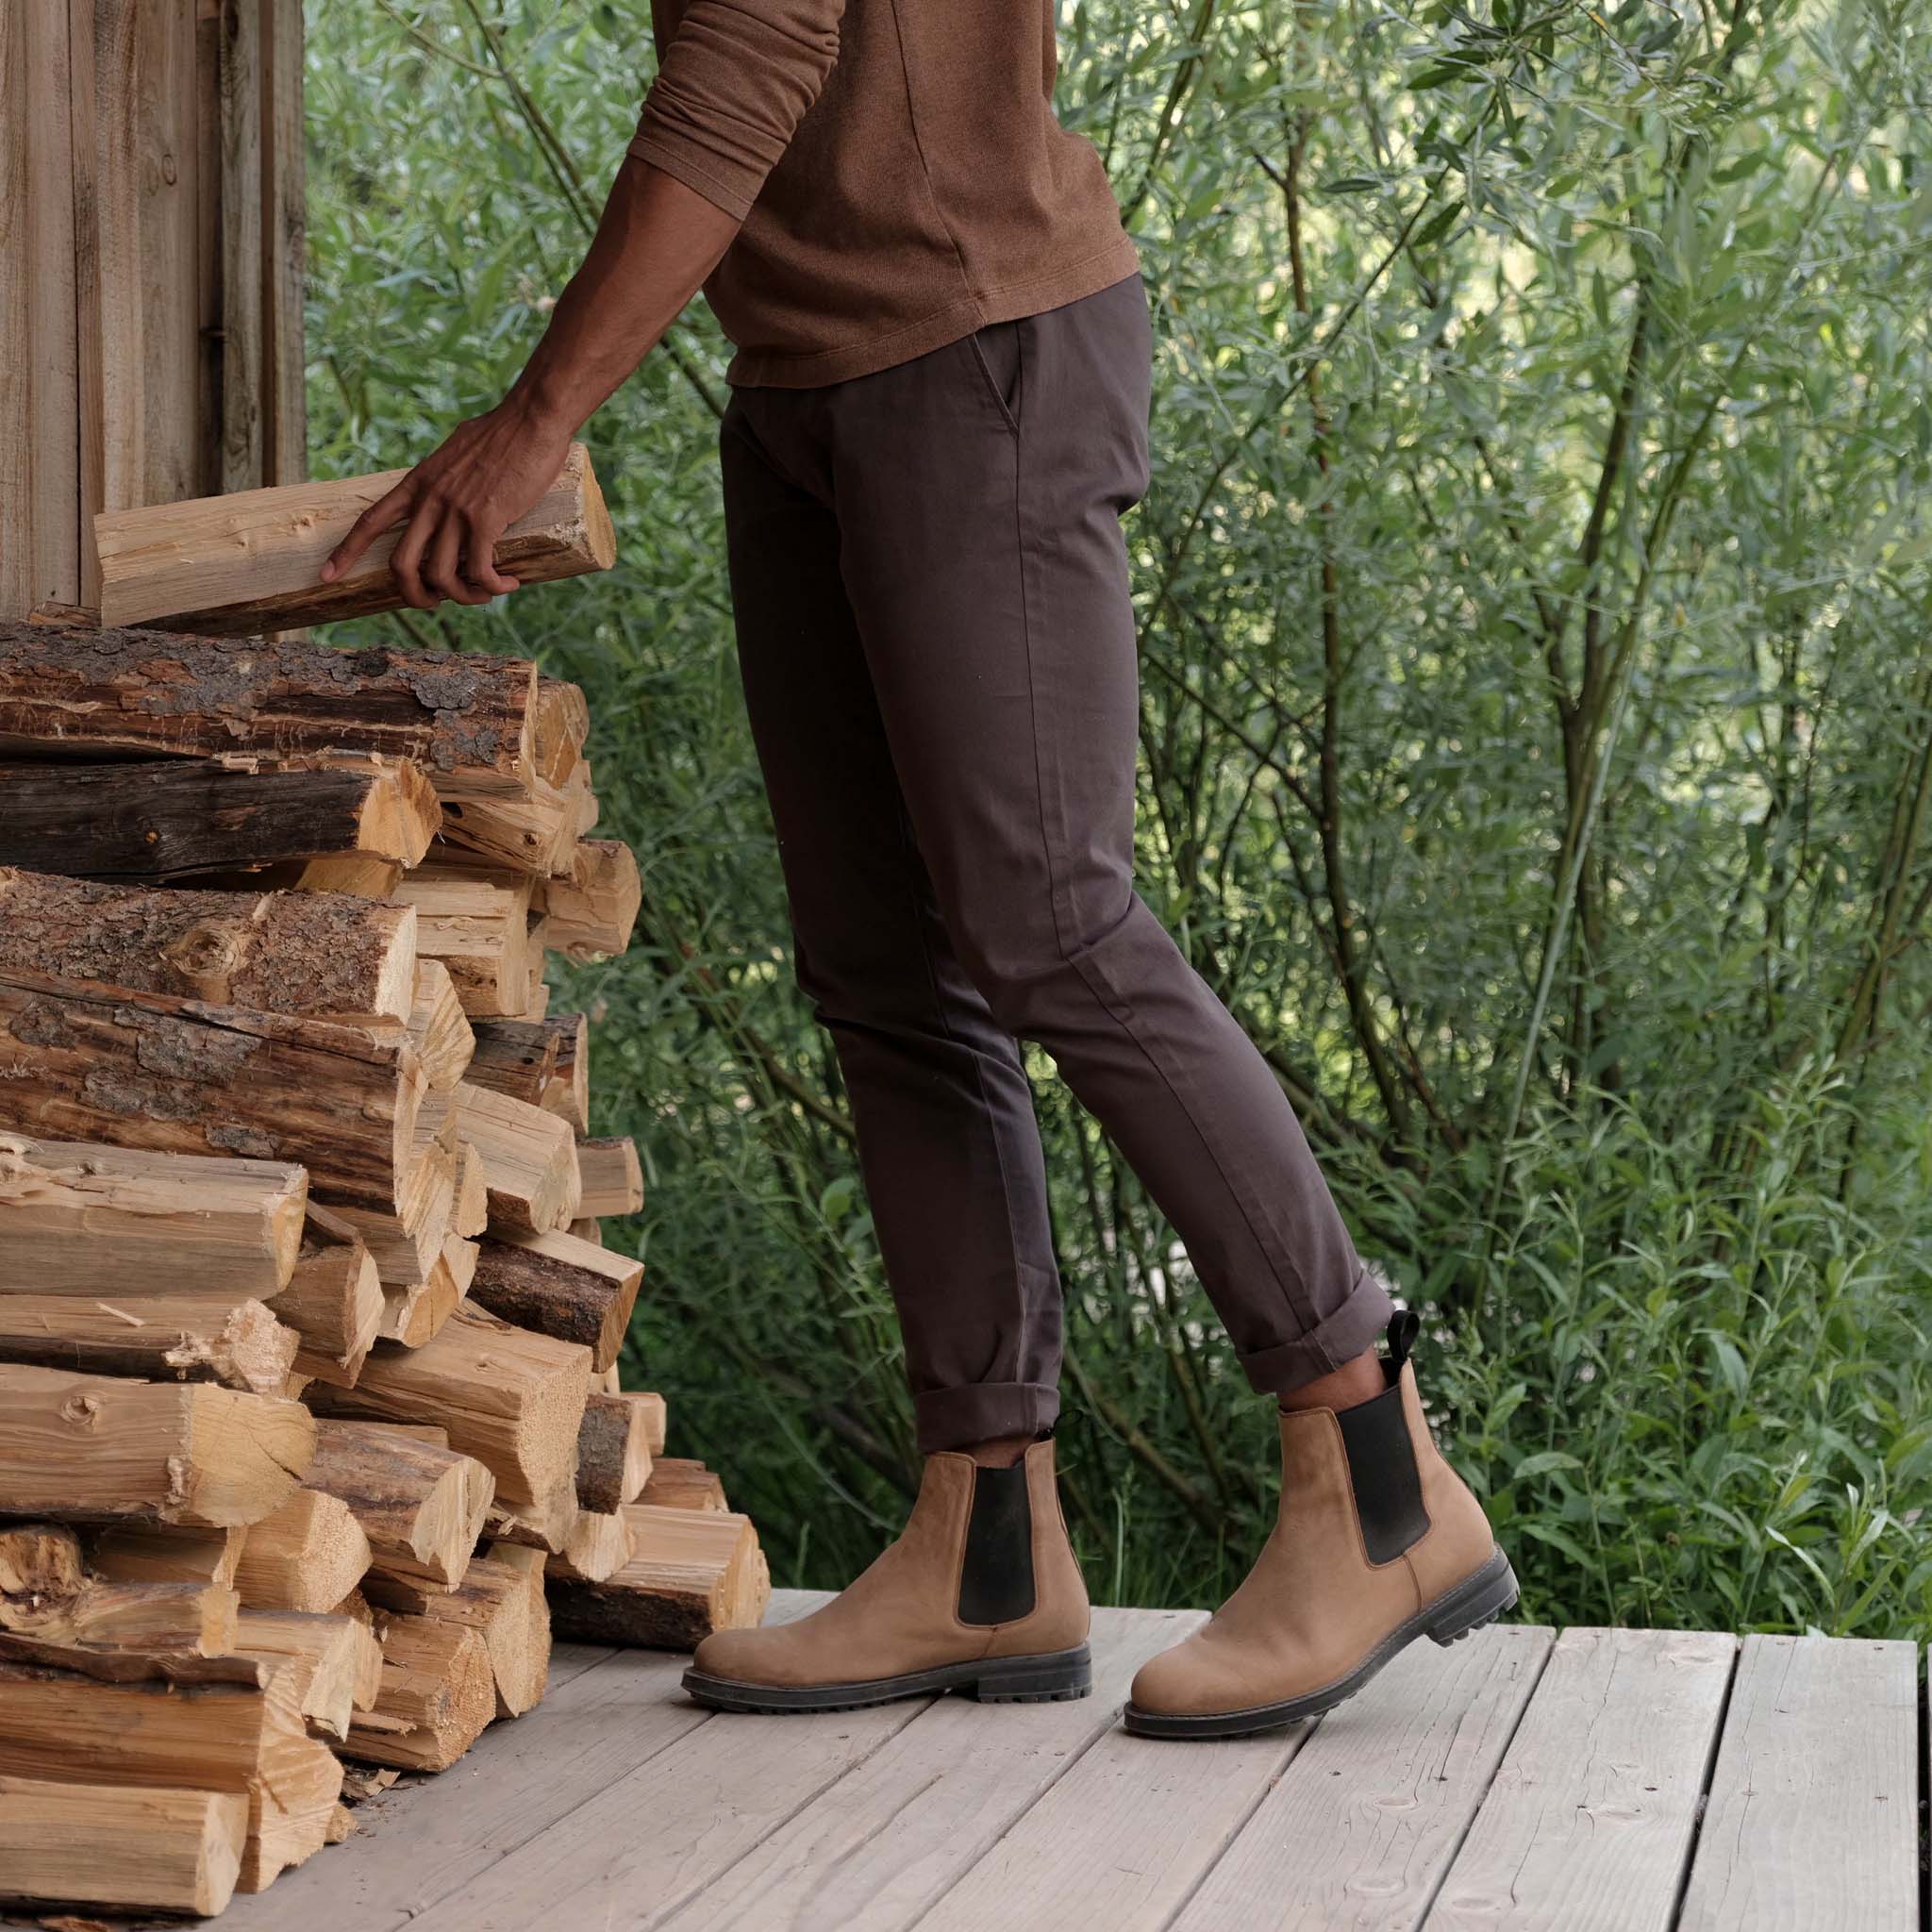 Image 1 of the Daytripper Chelsea Boot Tobacco on model